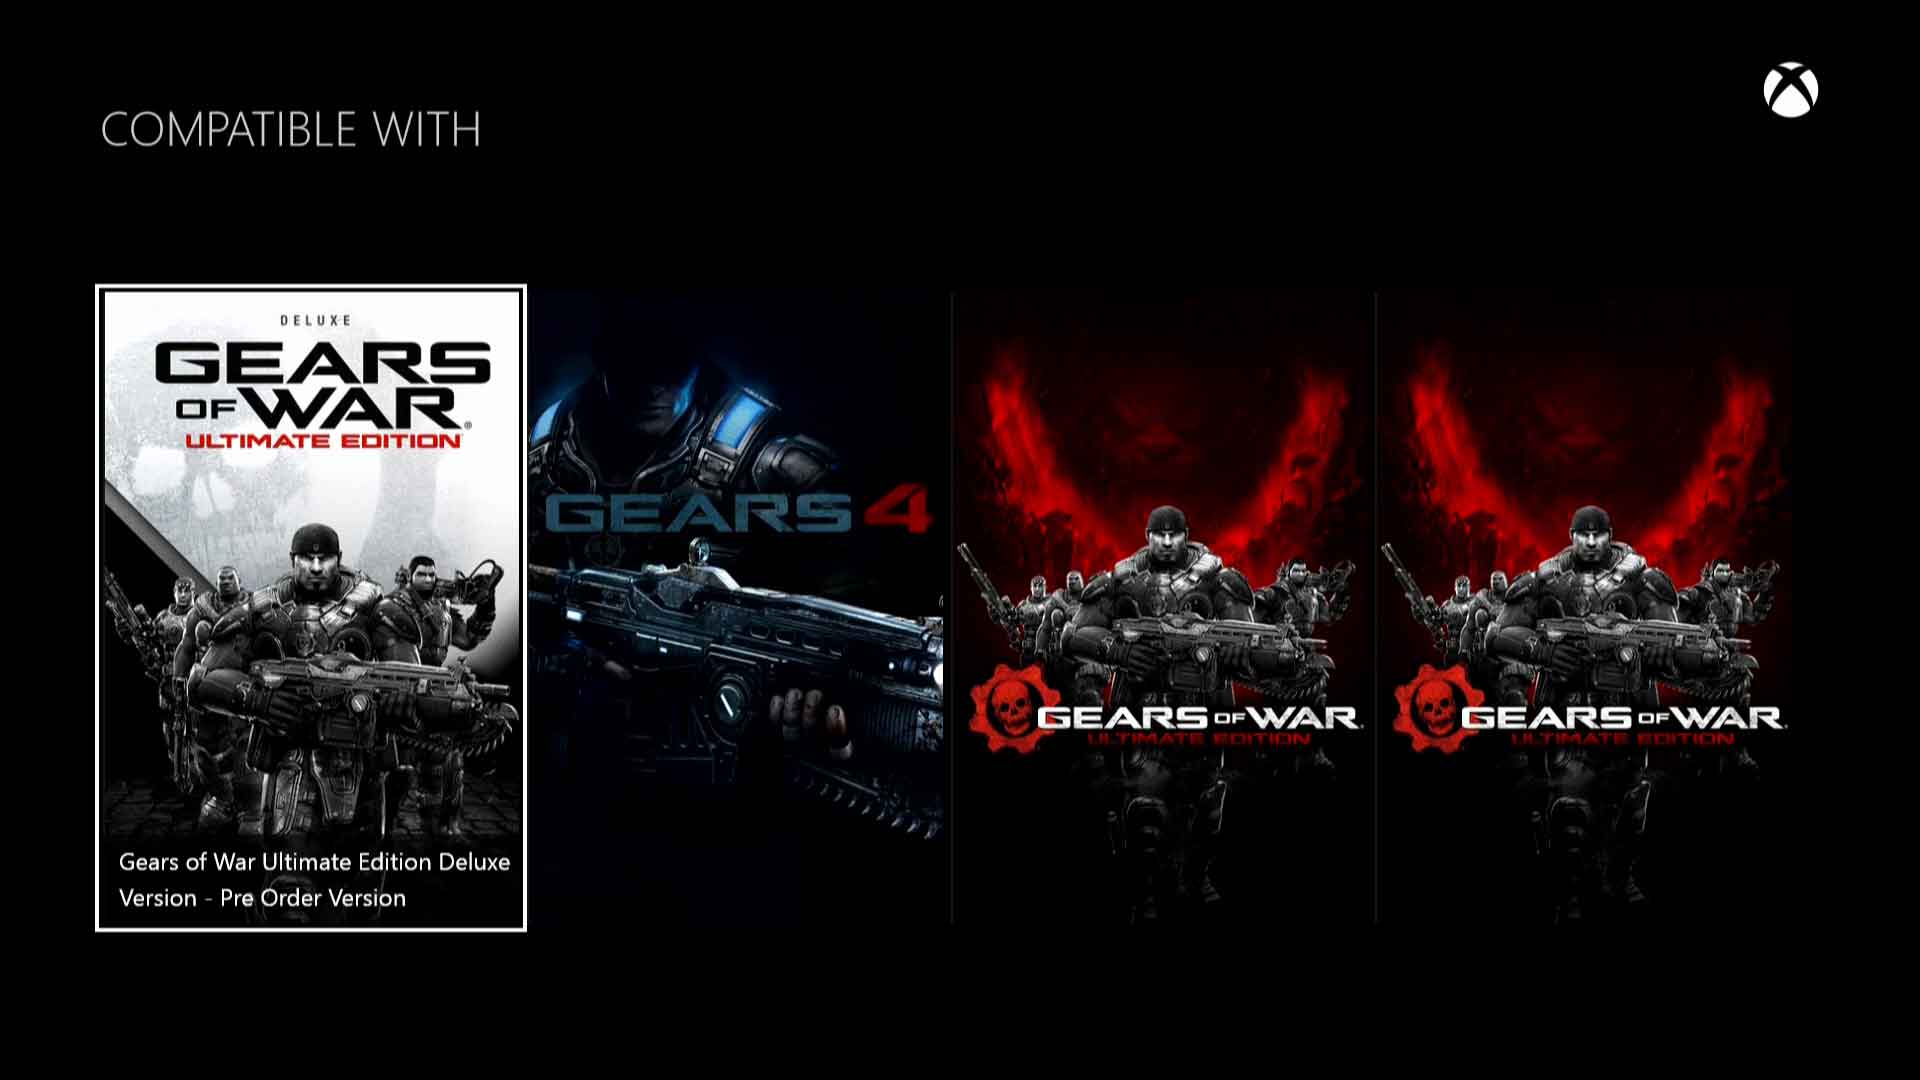 Gears of War Ultimate Skins Compatible with Gears of War 4